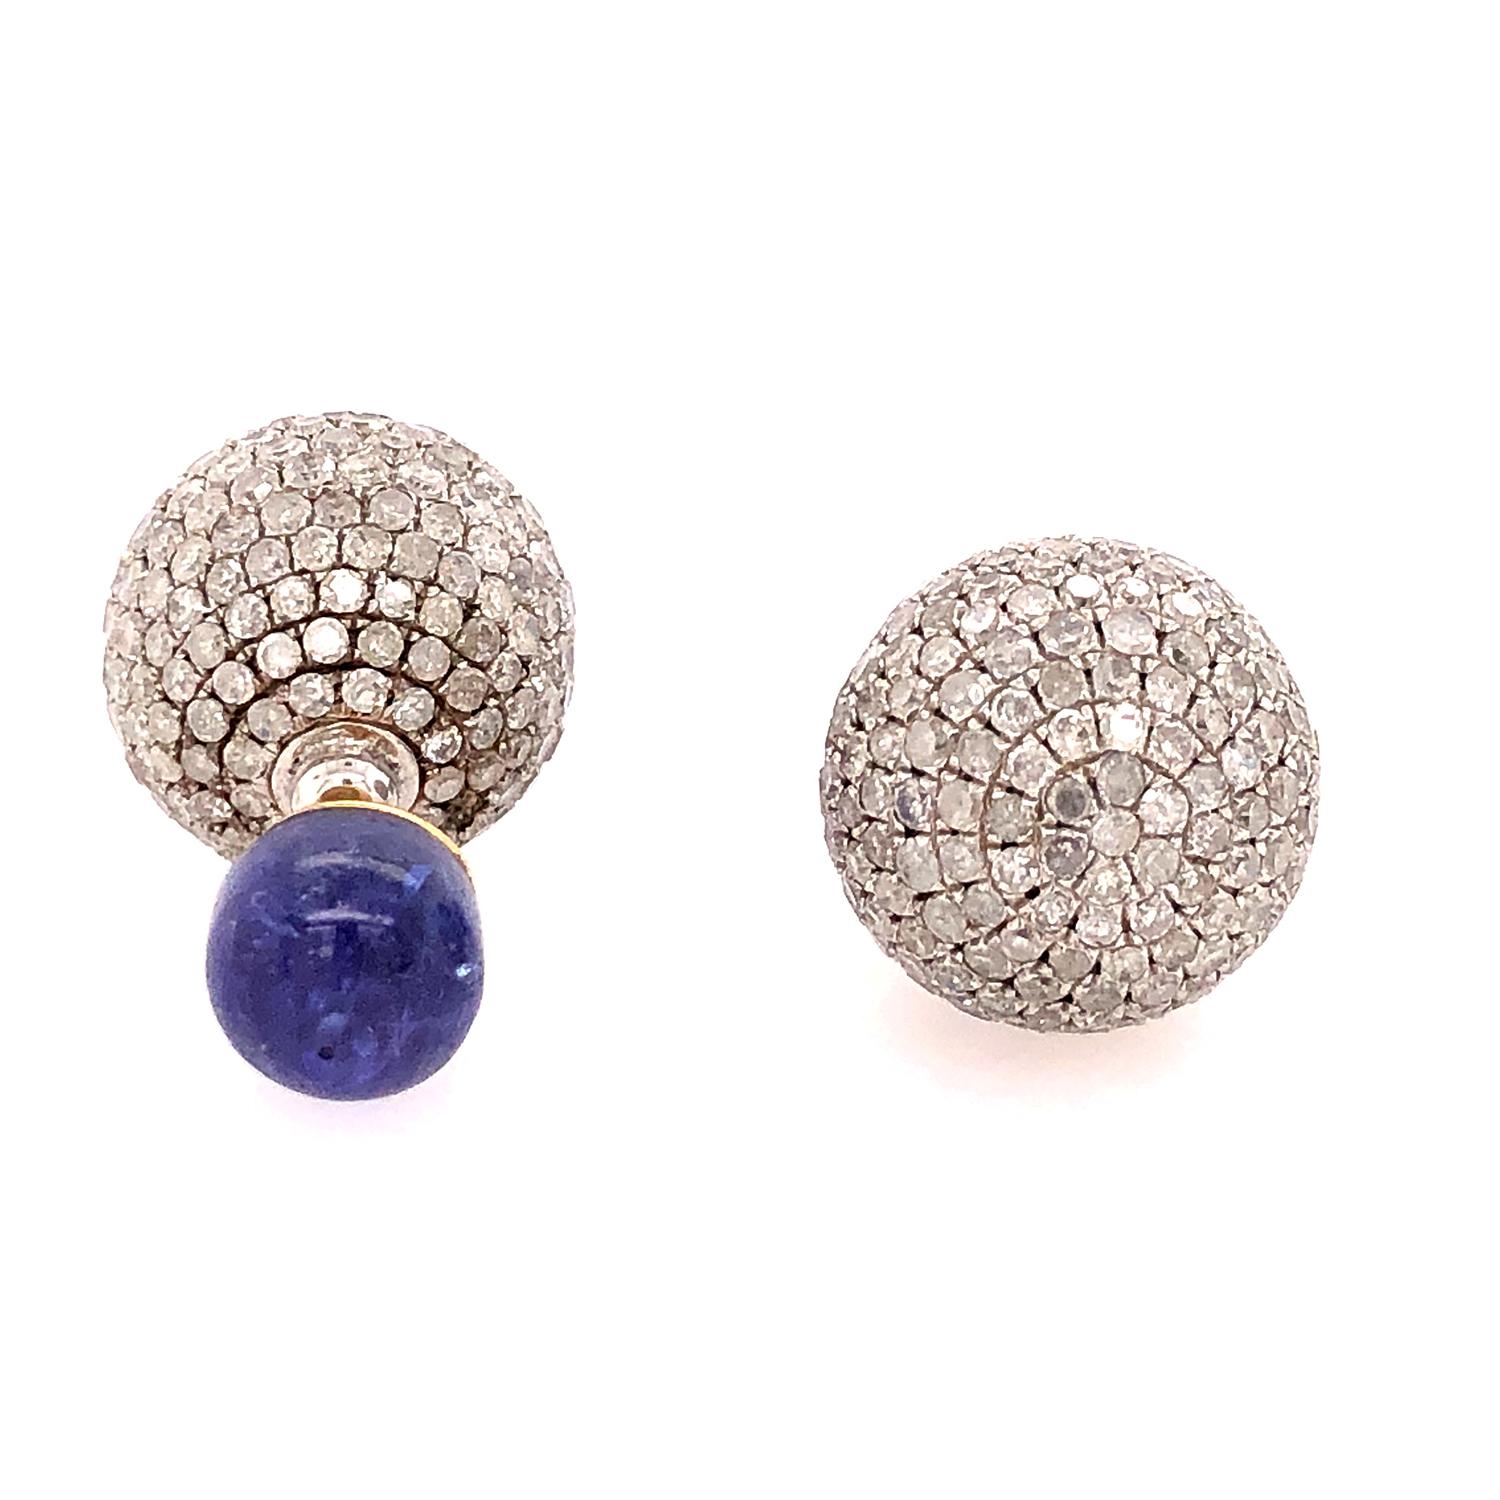 Art Deco White Diamonds Pave & Tanzanite Ball Earrings Made In 18k Gold & Silver For Sale